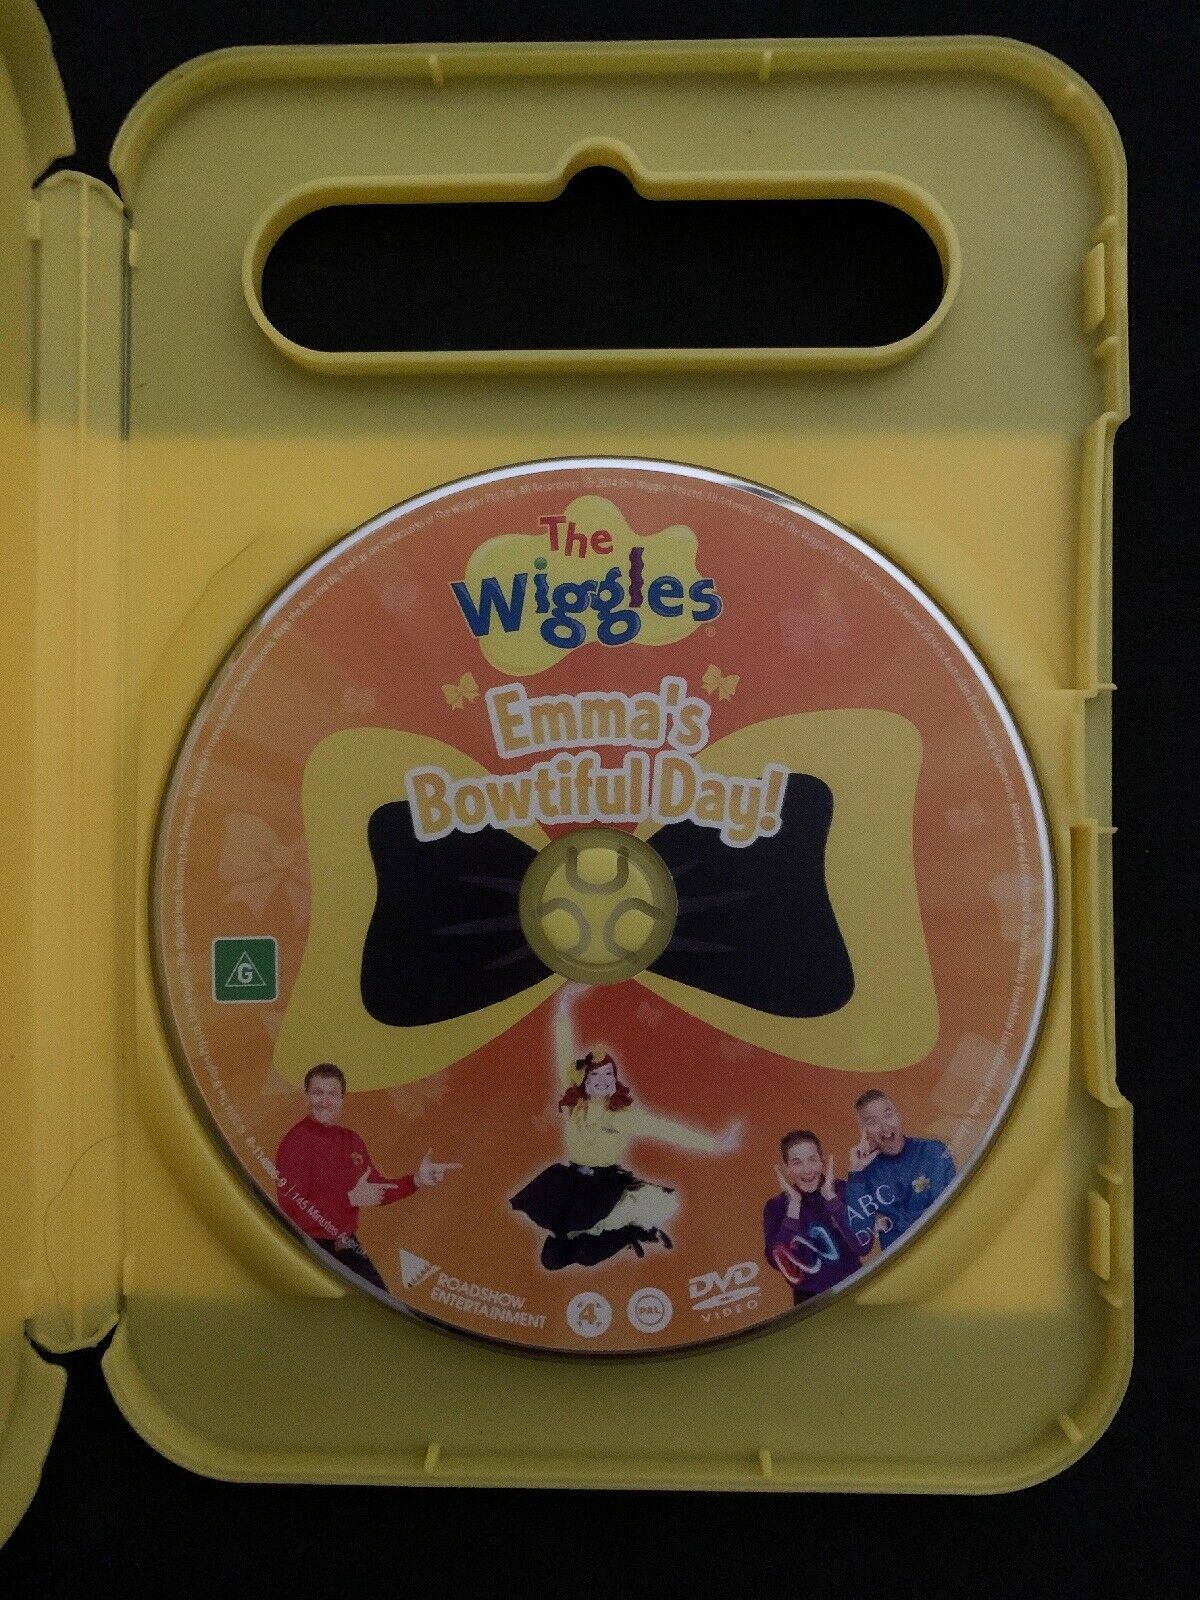 The Wiggles - Emma's Bowtiful Day! (DVD) - Region 4 - ABC For Kids